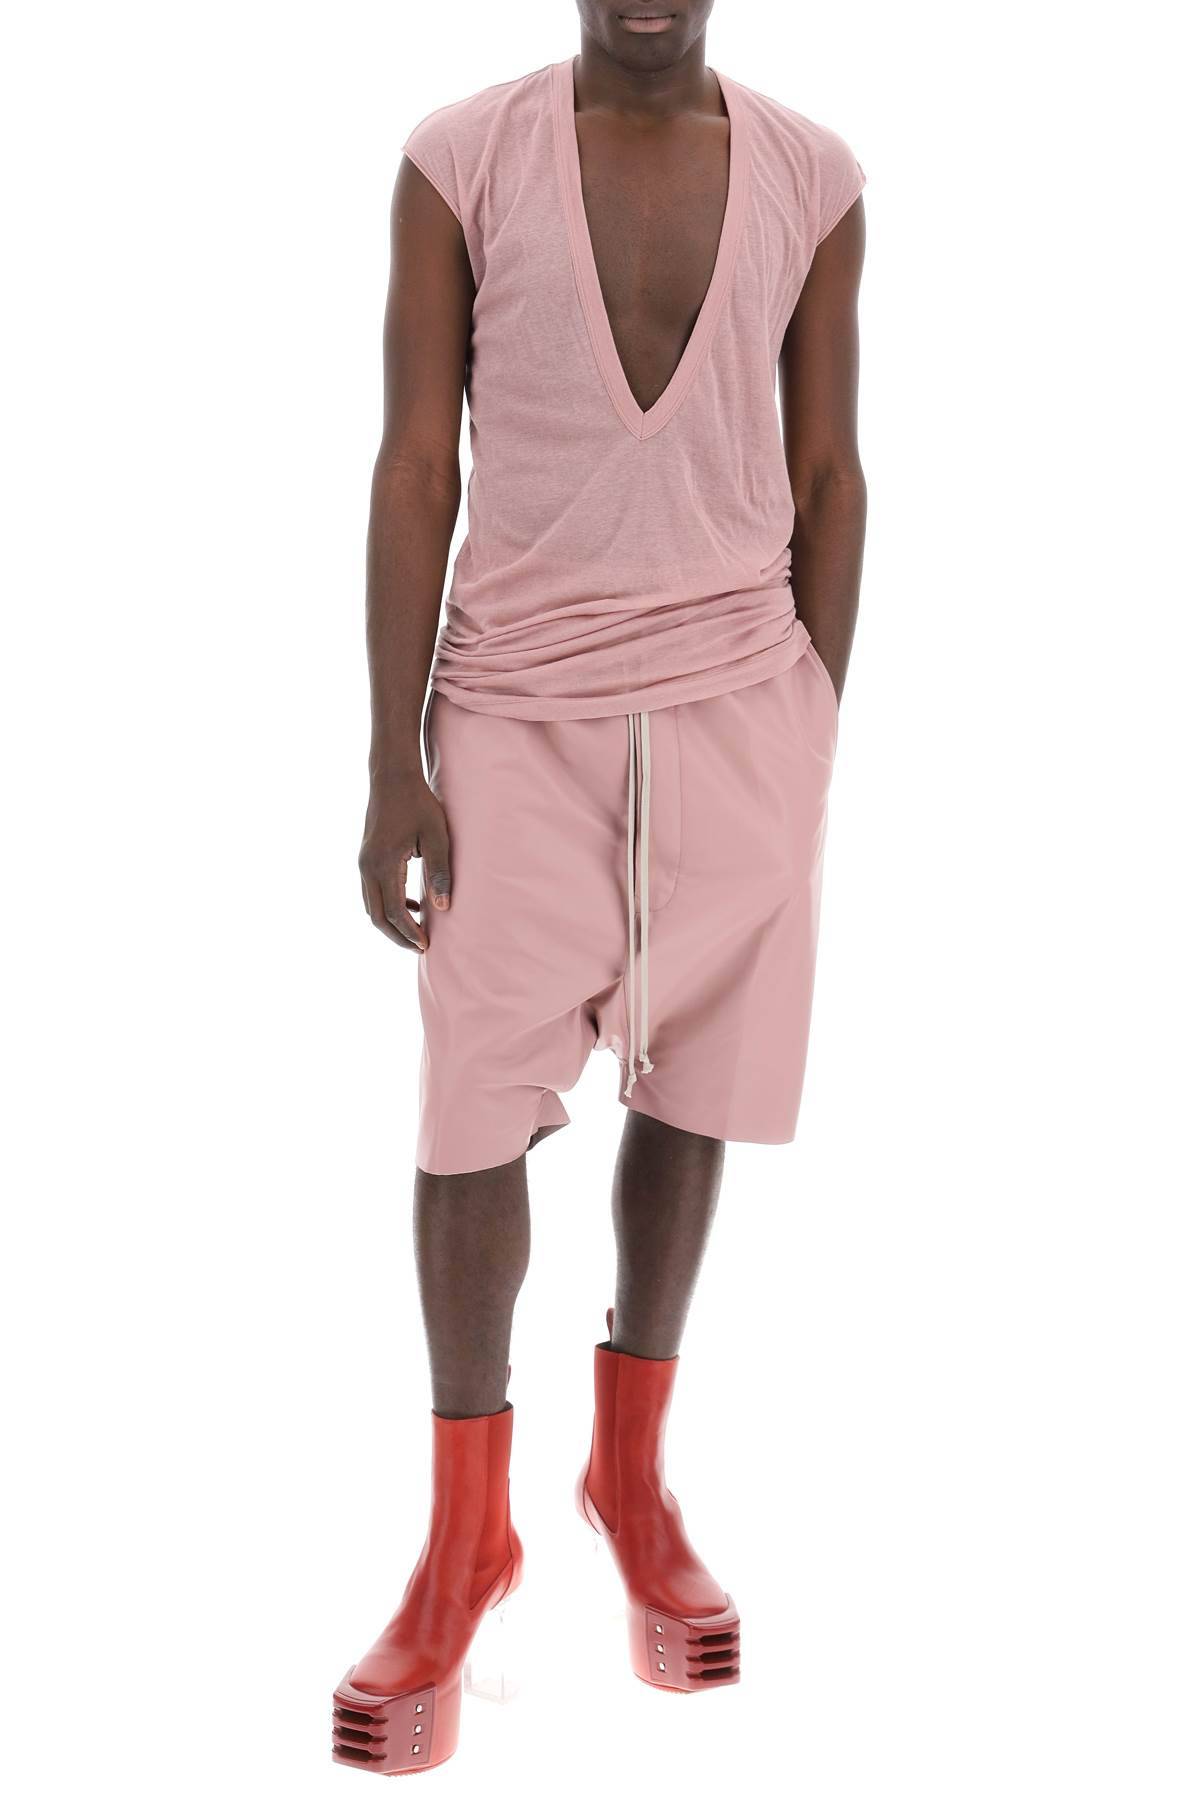 Shop Rick Owens "organic Cotton Dylan Top For In Pink